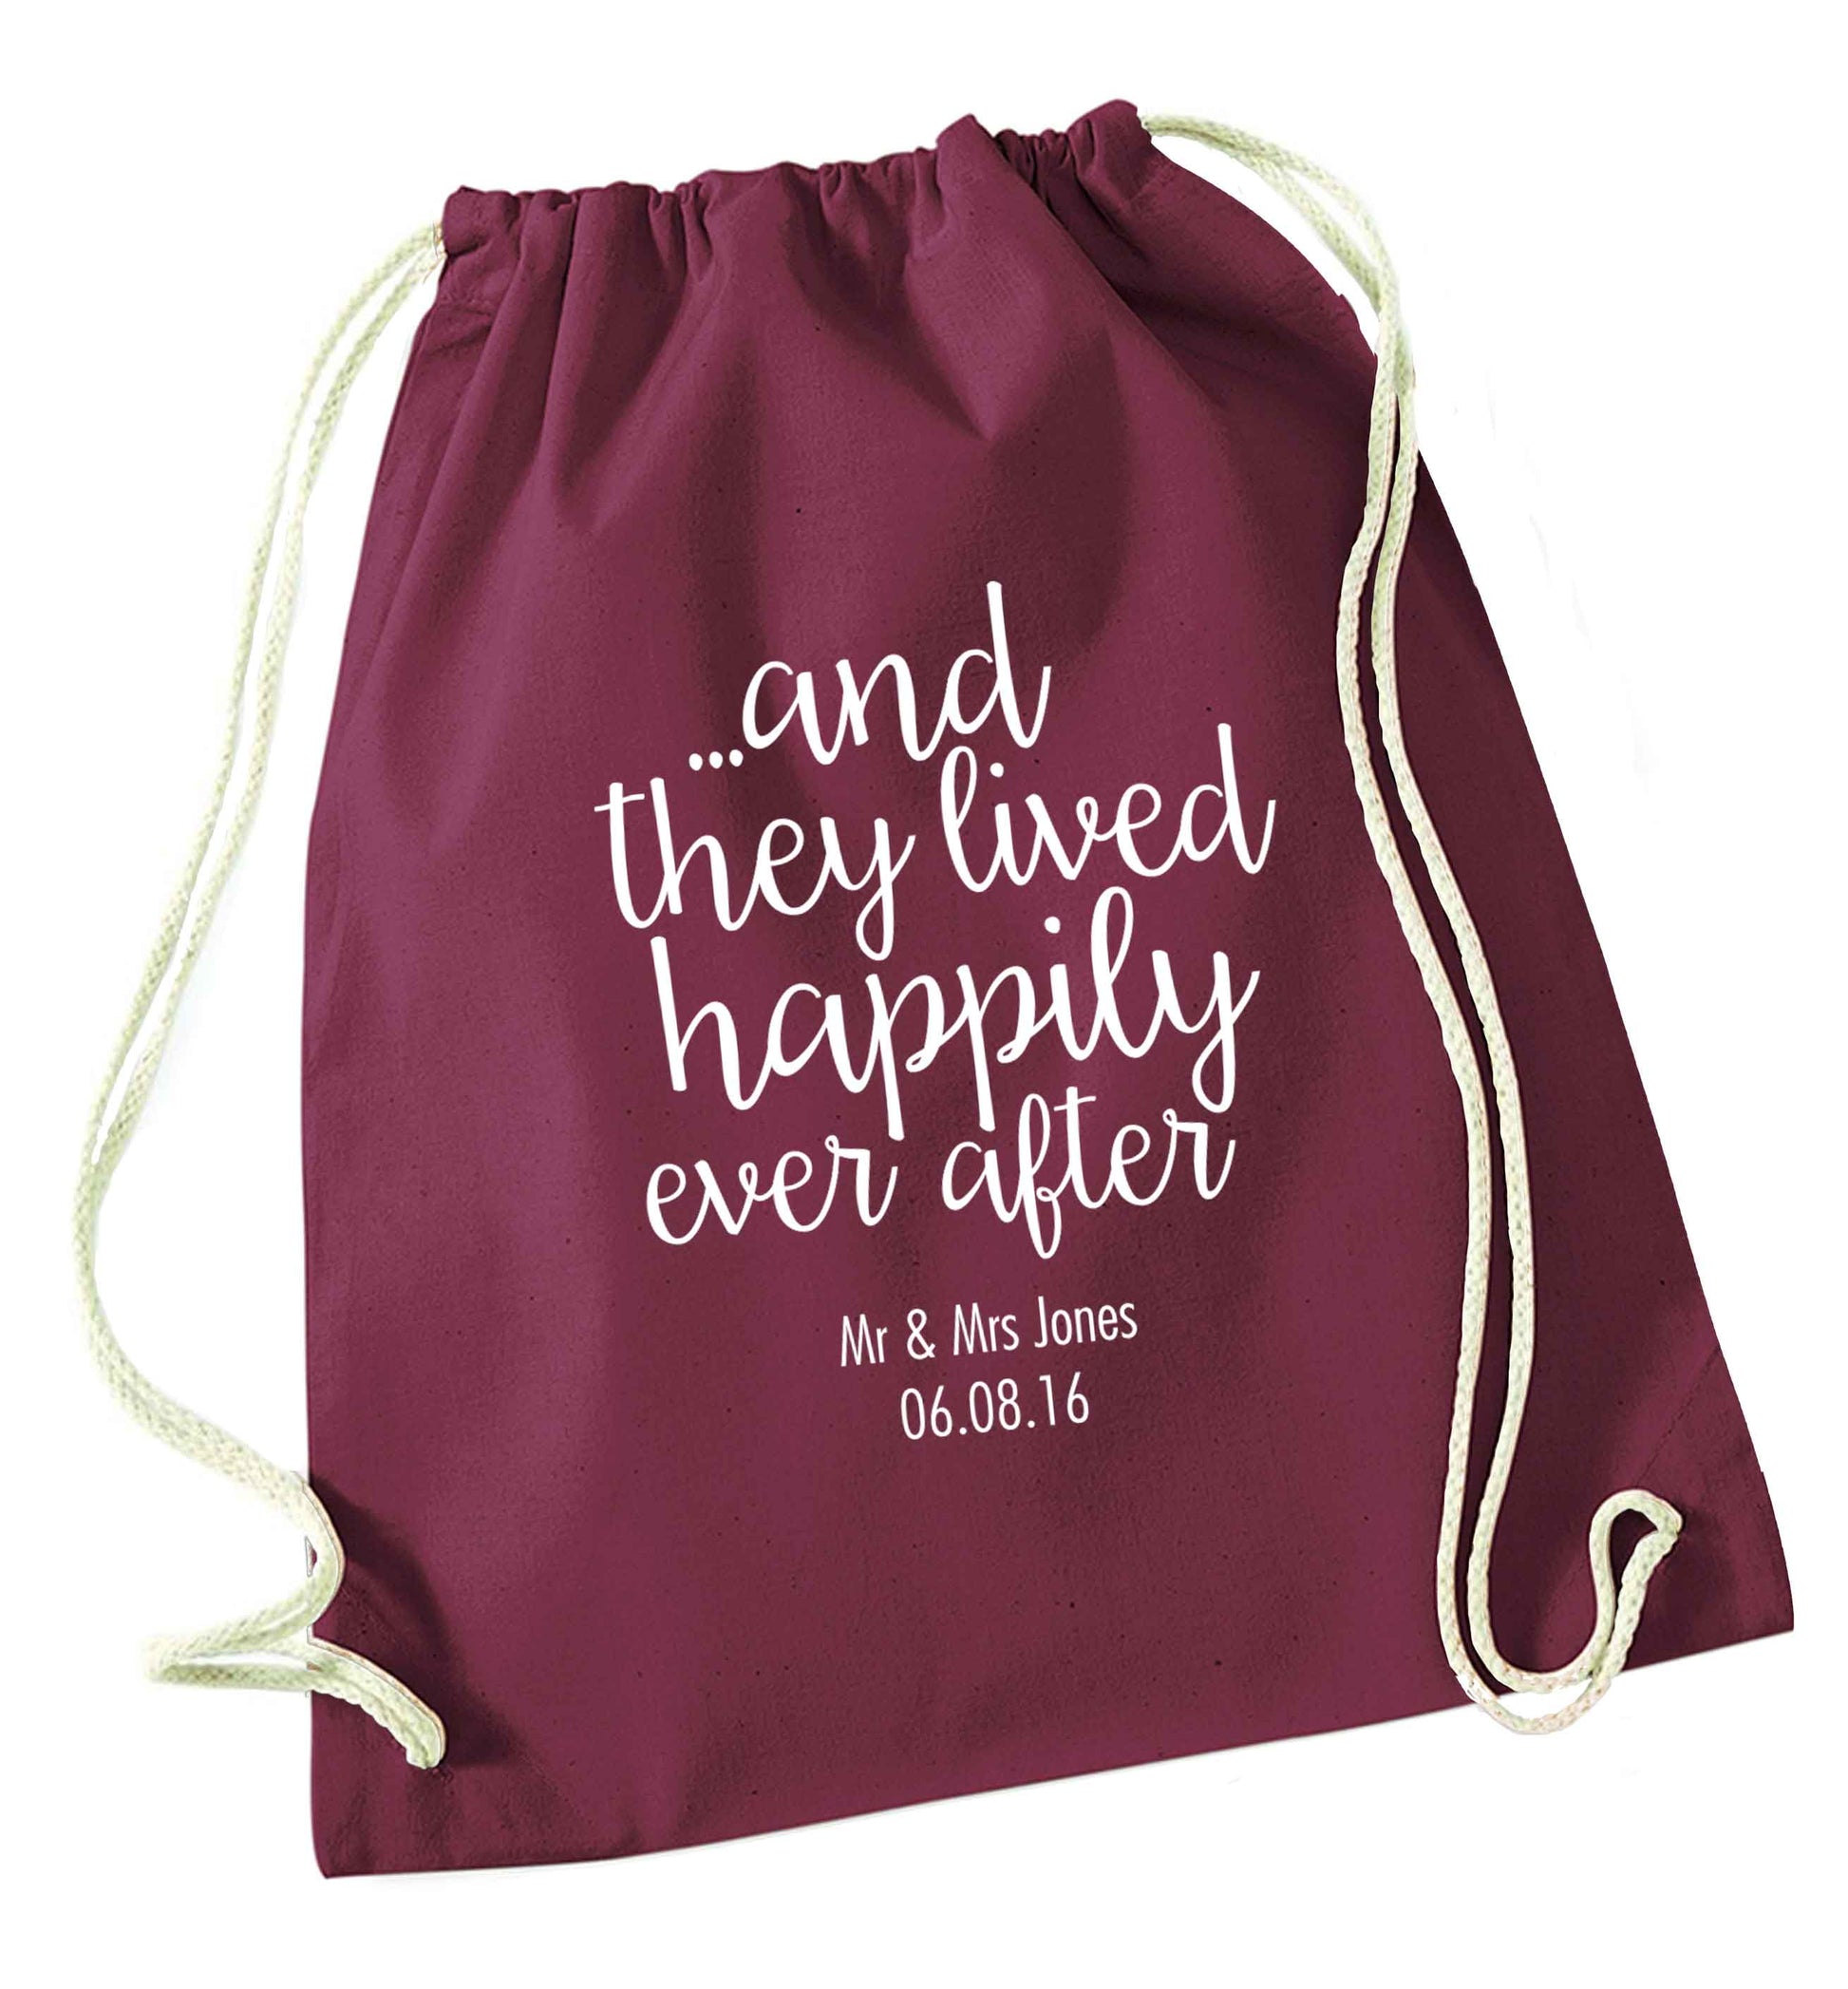 ...and they lived happily ever after - personalised date and names maroon drawstring bag